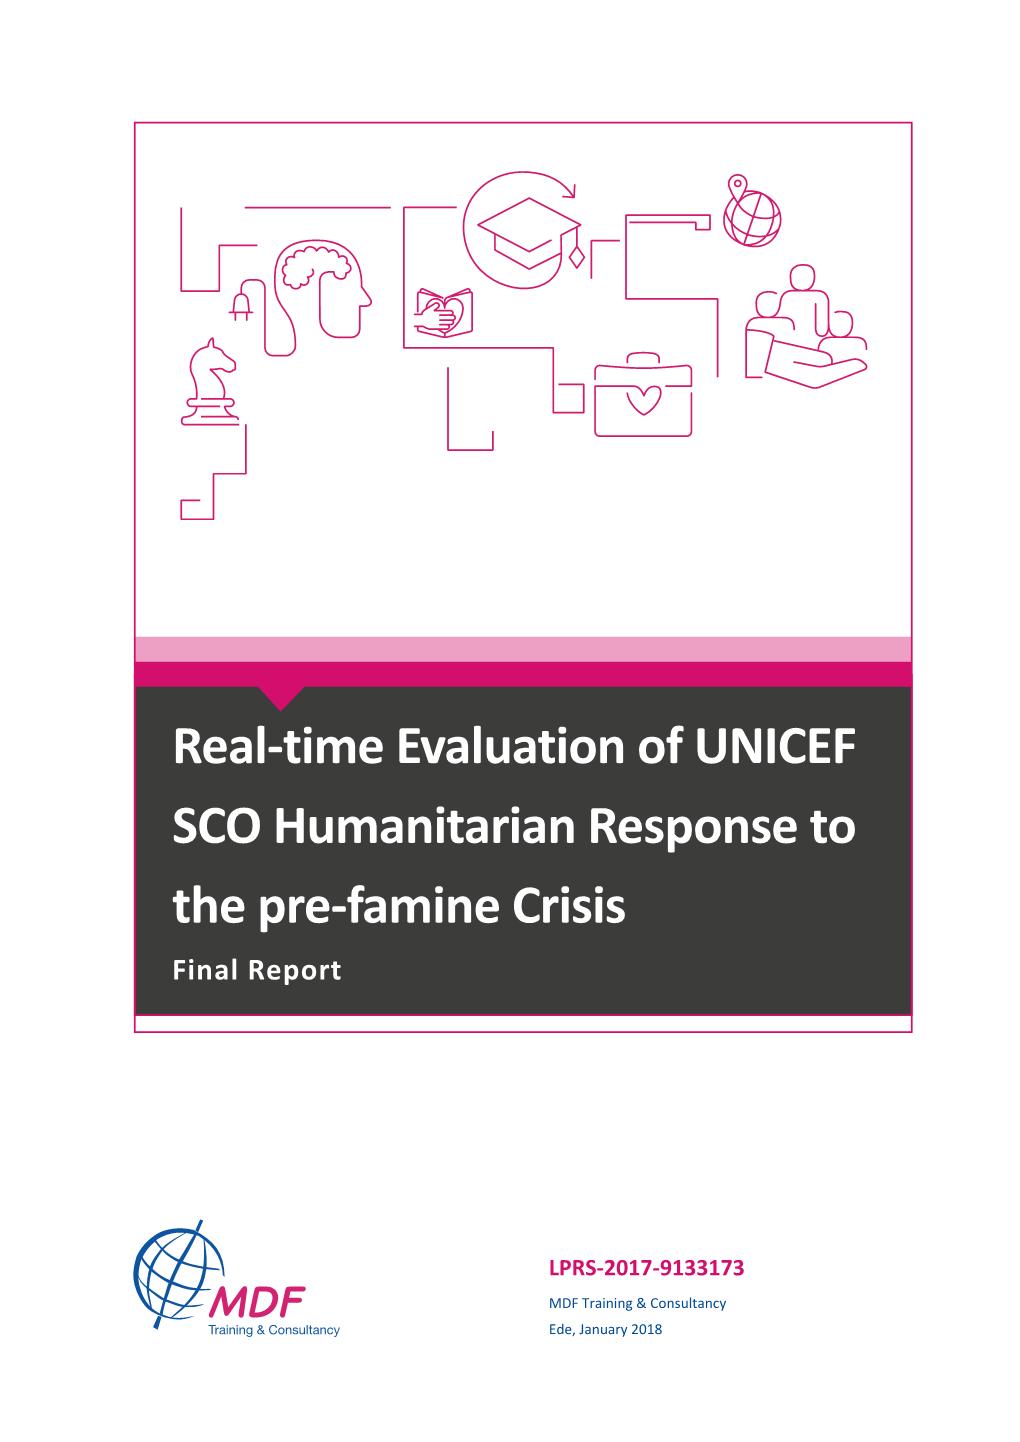 Real-Time Evaluation of UNICEF SCO Humanitarian Response to the Pre-Famine Crisis Final Report